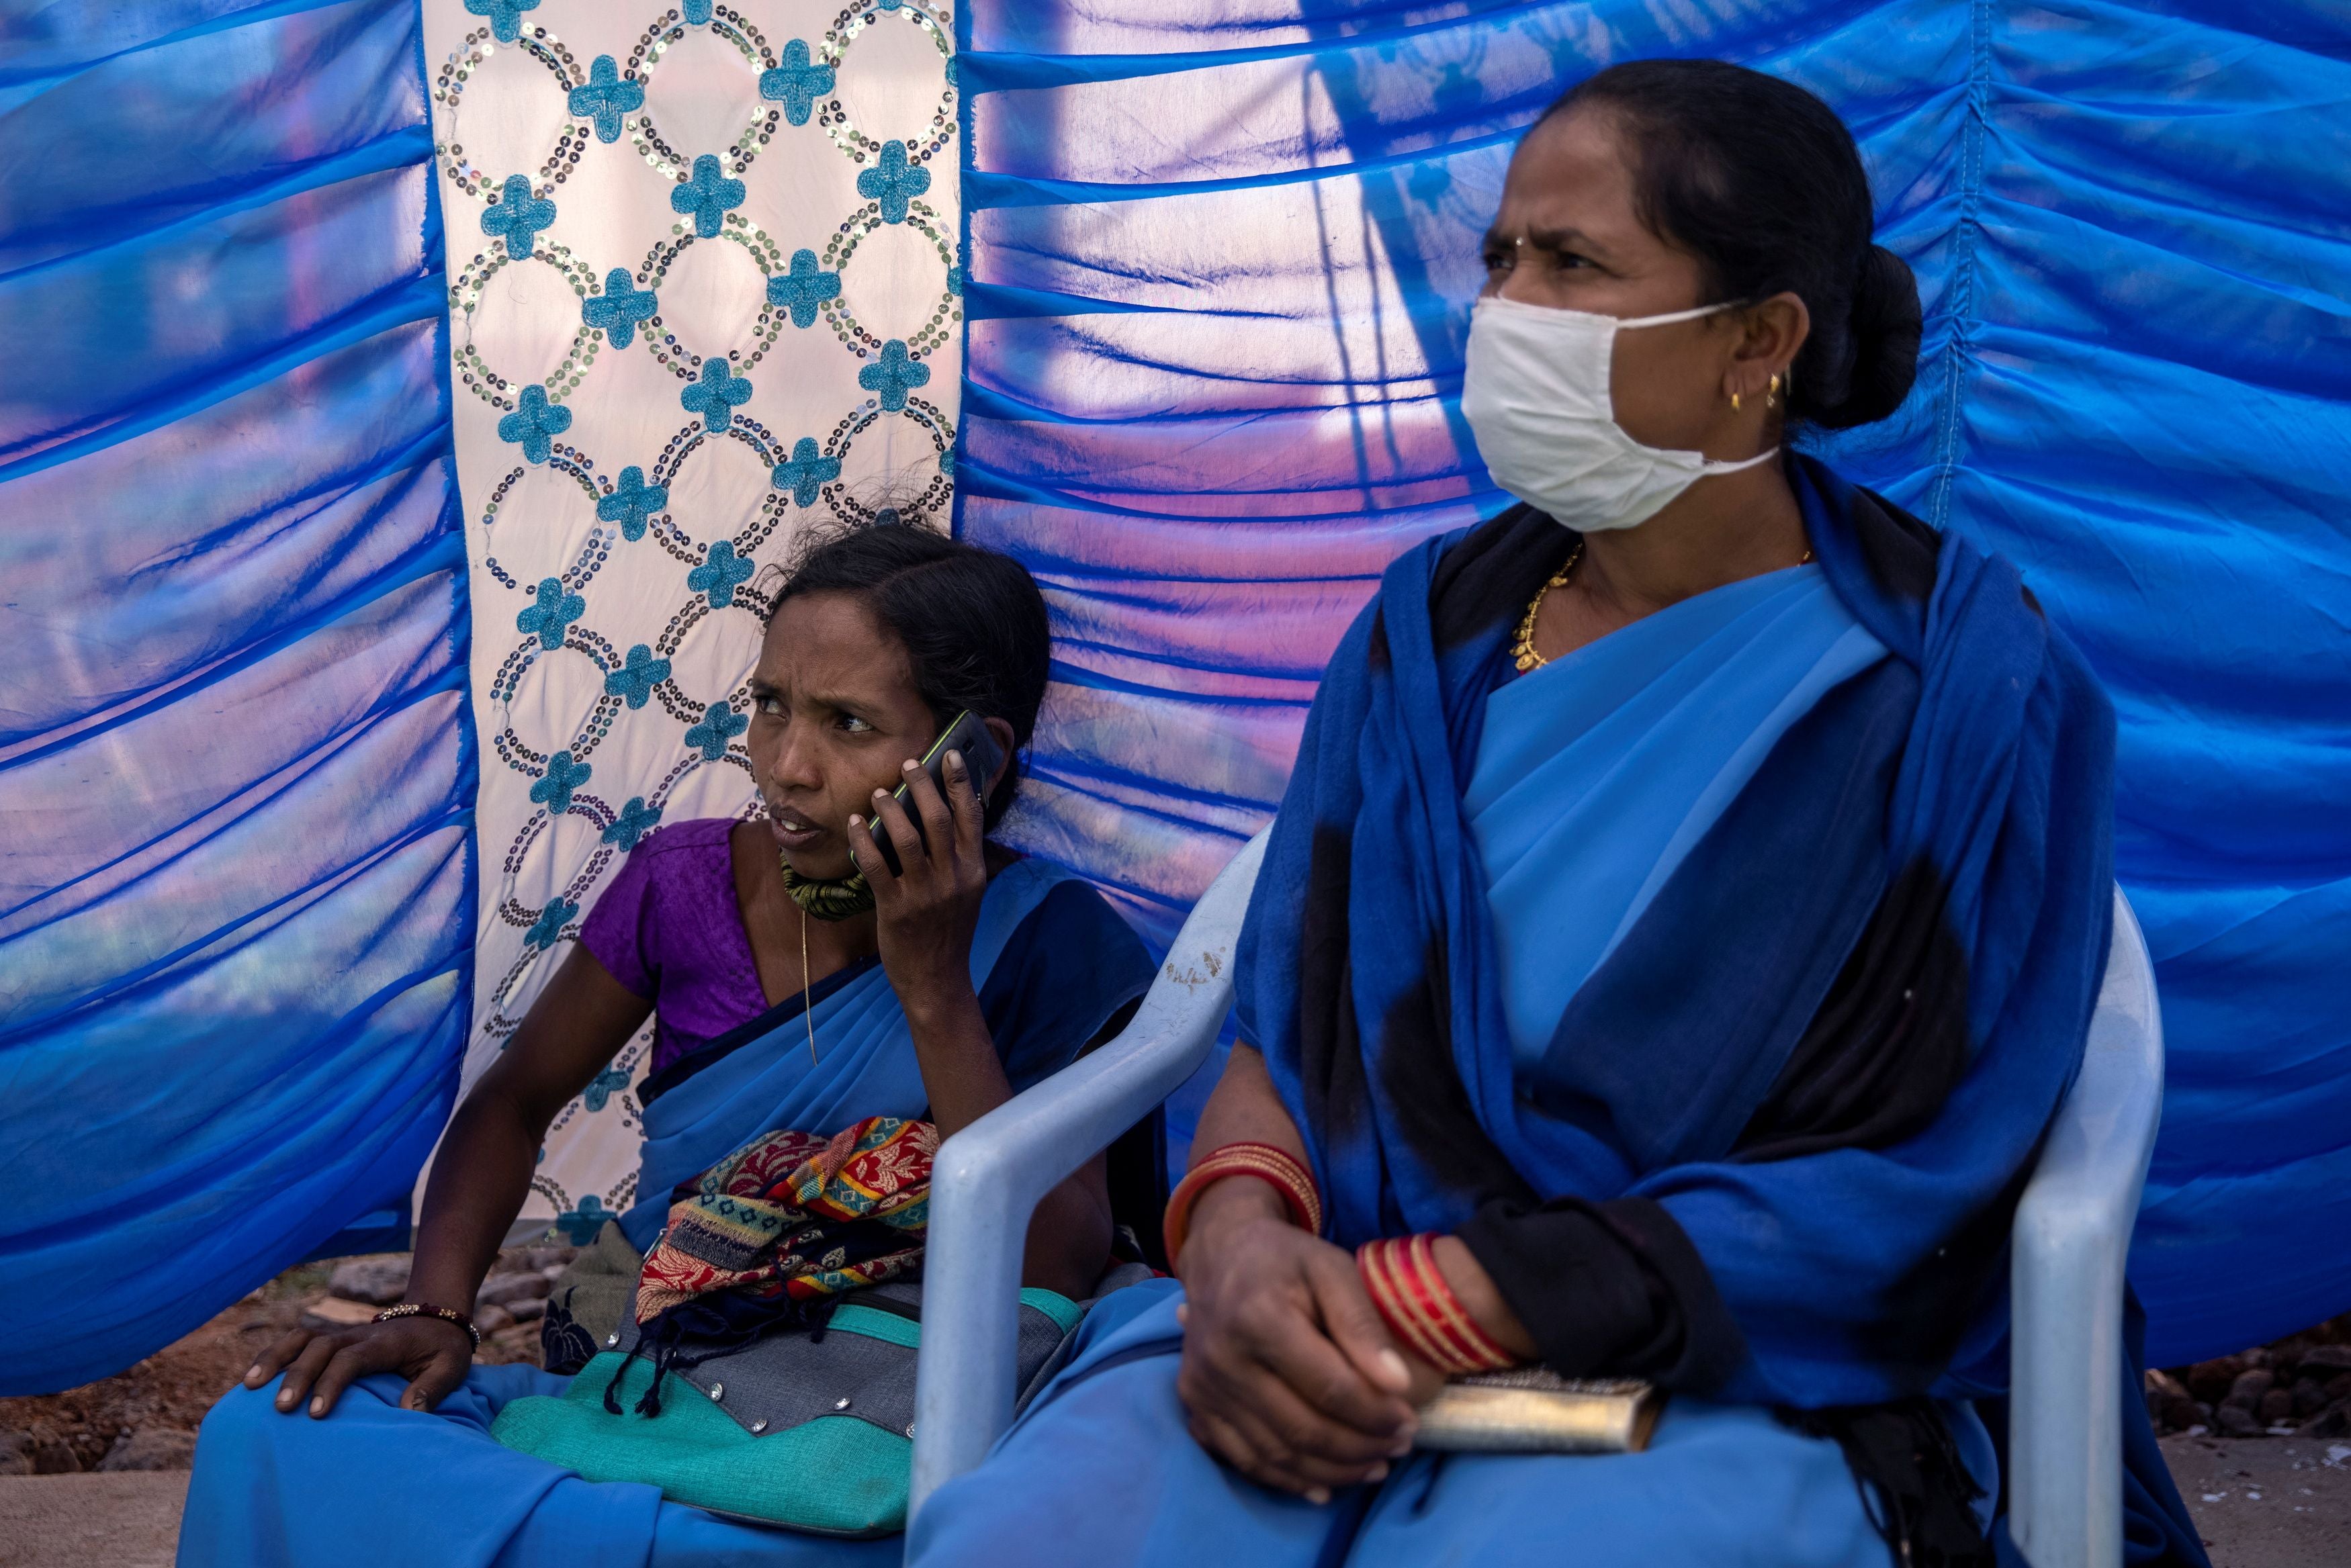 Reena Jani, 34, a health worker, waits to receive the vaccine developed by Oxford-AstraZeneca at Mathalput Community Health Centre, Koraput, India